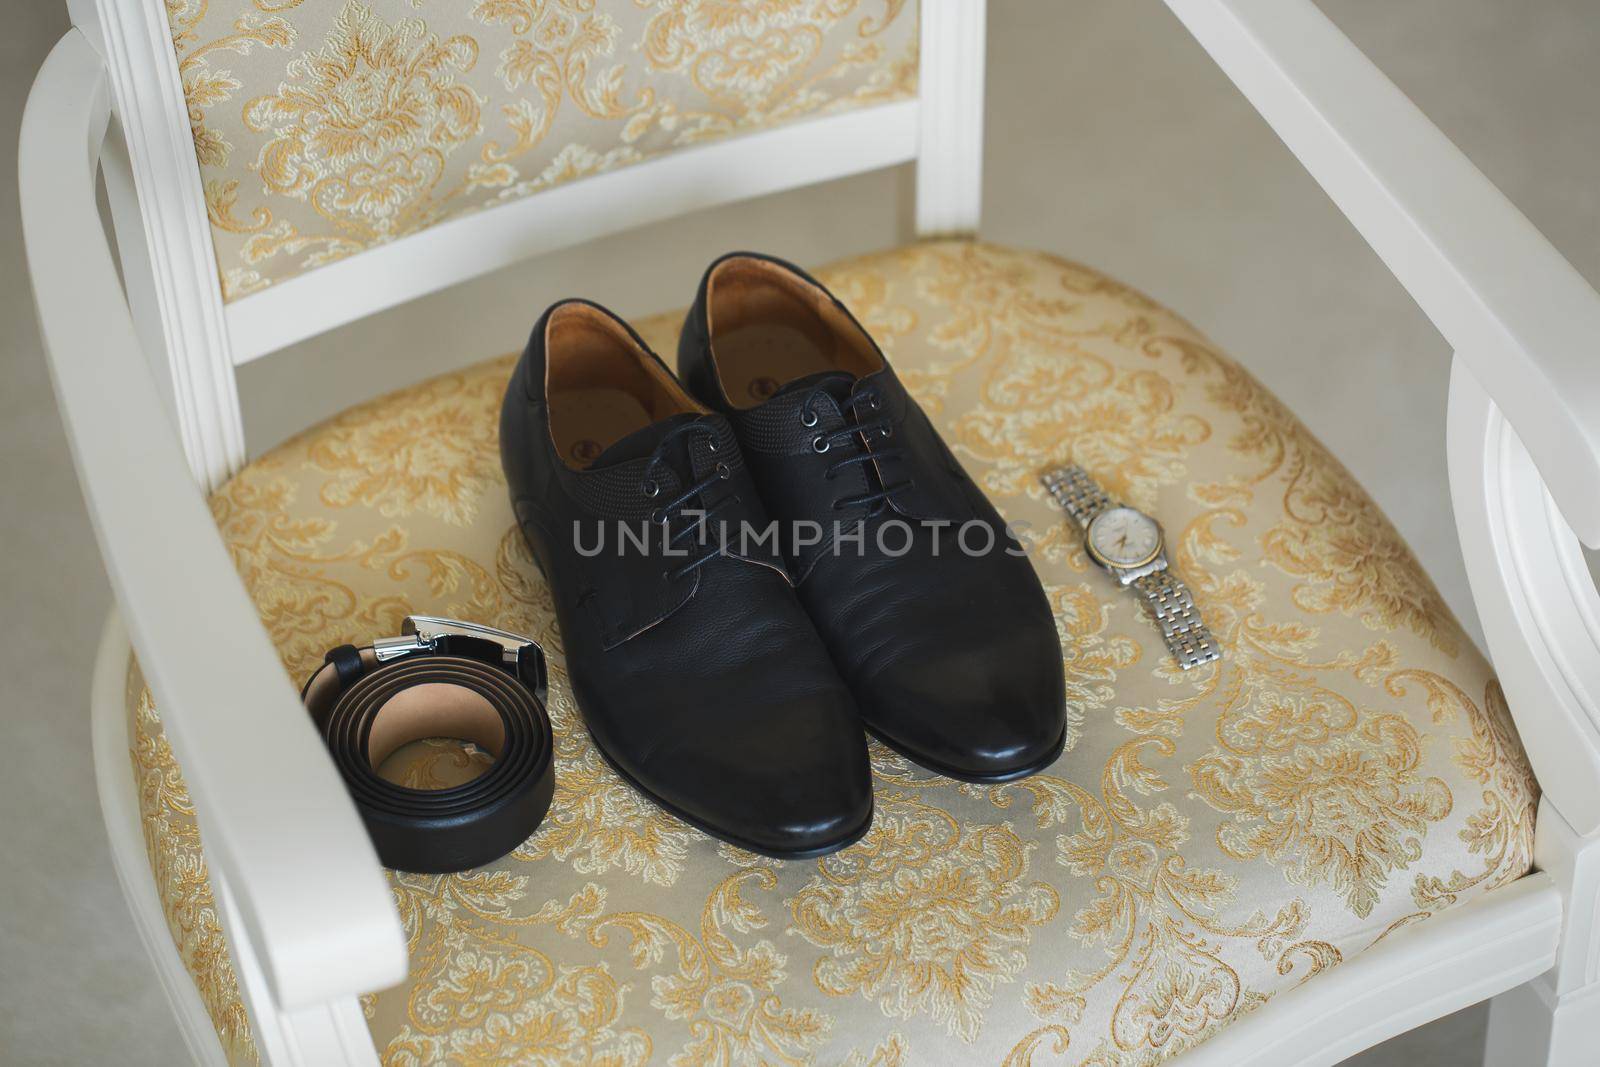 Accessories for the groom. Wedding shoes on a chair